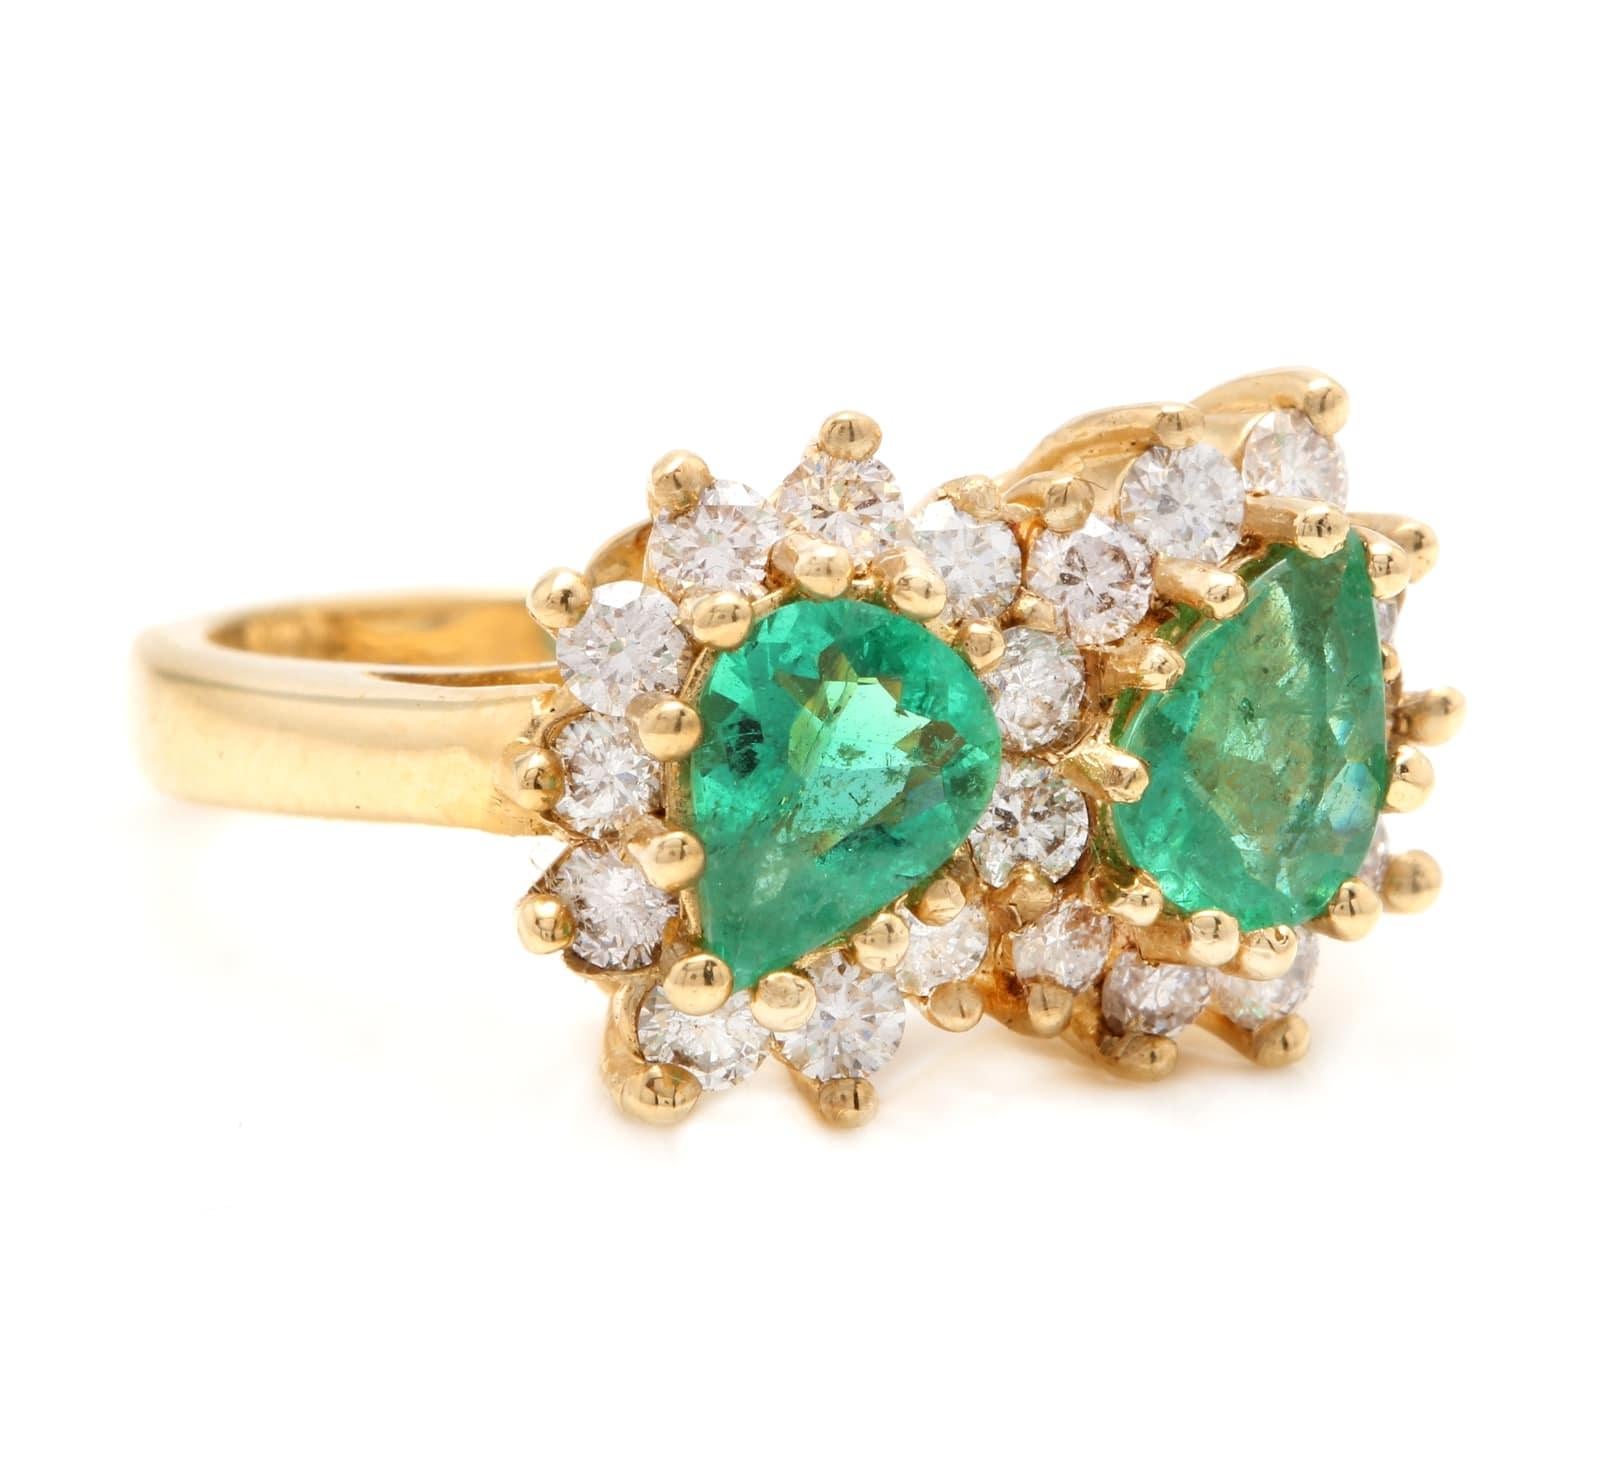 2.70 Carats Natural Emerald and Diamond 14K Solid White Gold Ring

Total Natural Green Emeralds Weight is: Approx. 2.00 Carats (transparent)

Emerald Measures: 7.00 x 5.00mm

Natural Round Diamonds Weight: Approx. 0.70 Carats (color G-H / Clarity